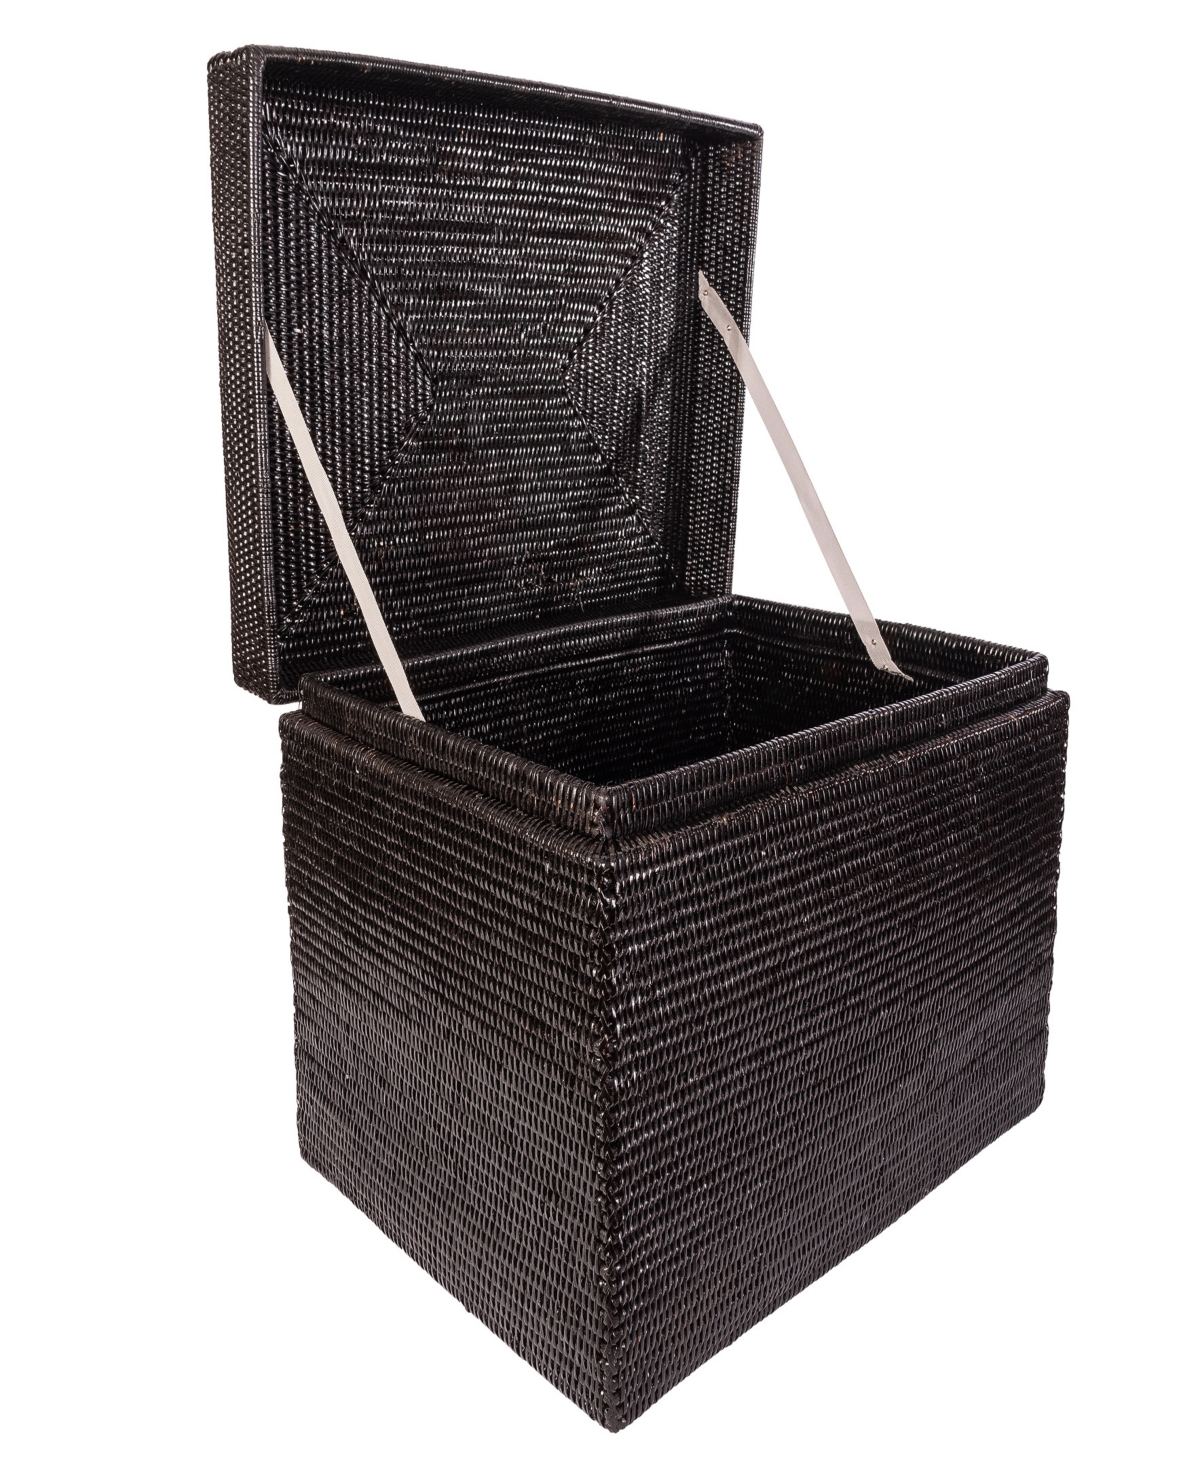 Shop Artifacts Trading Company Artifacts Rattan Rectangular Hinged Chest/trunk In Tudor Black